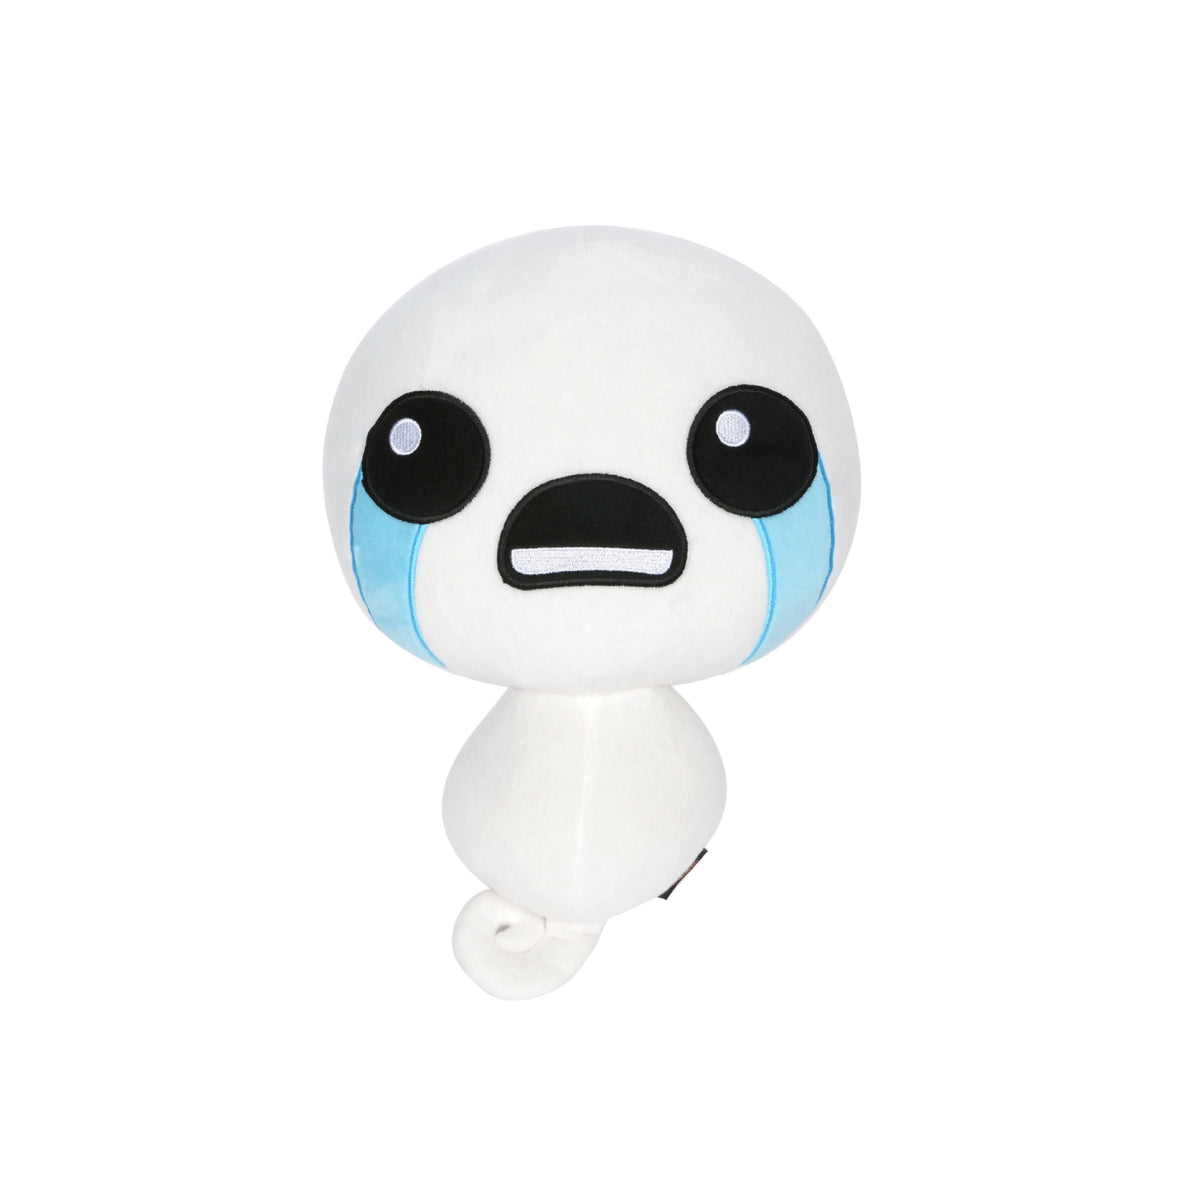 The Binding of Isaac Lost Plush